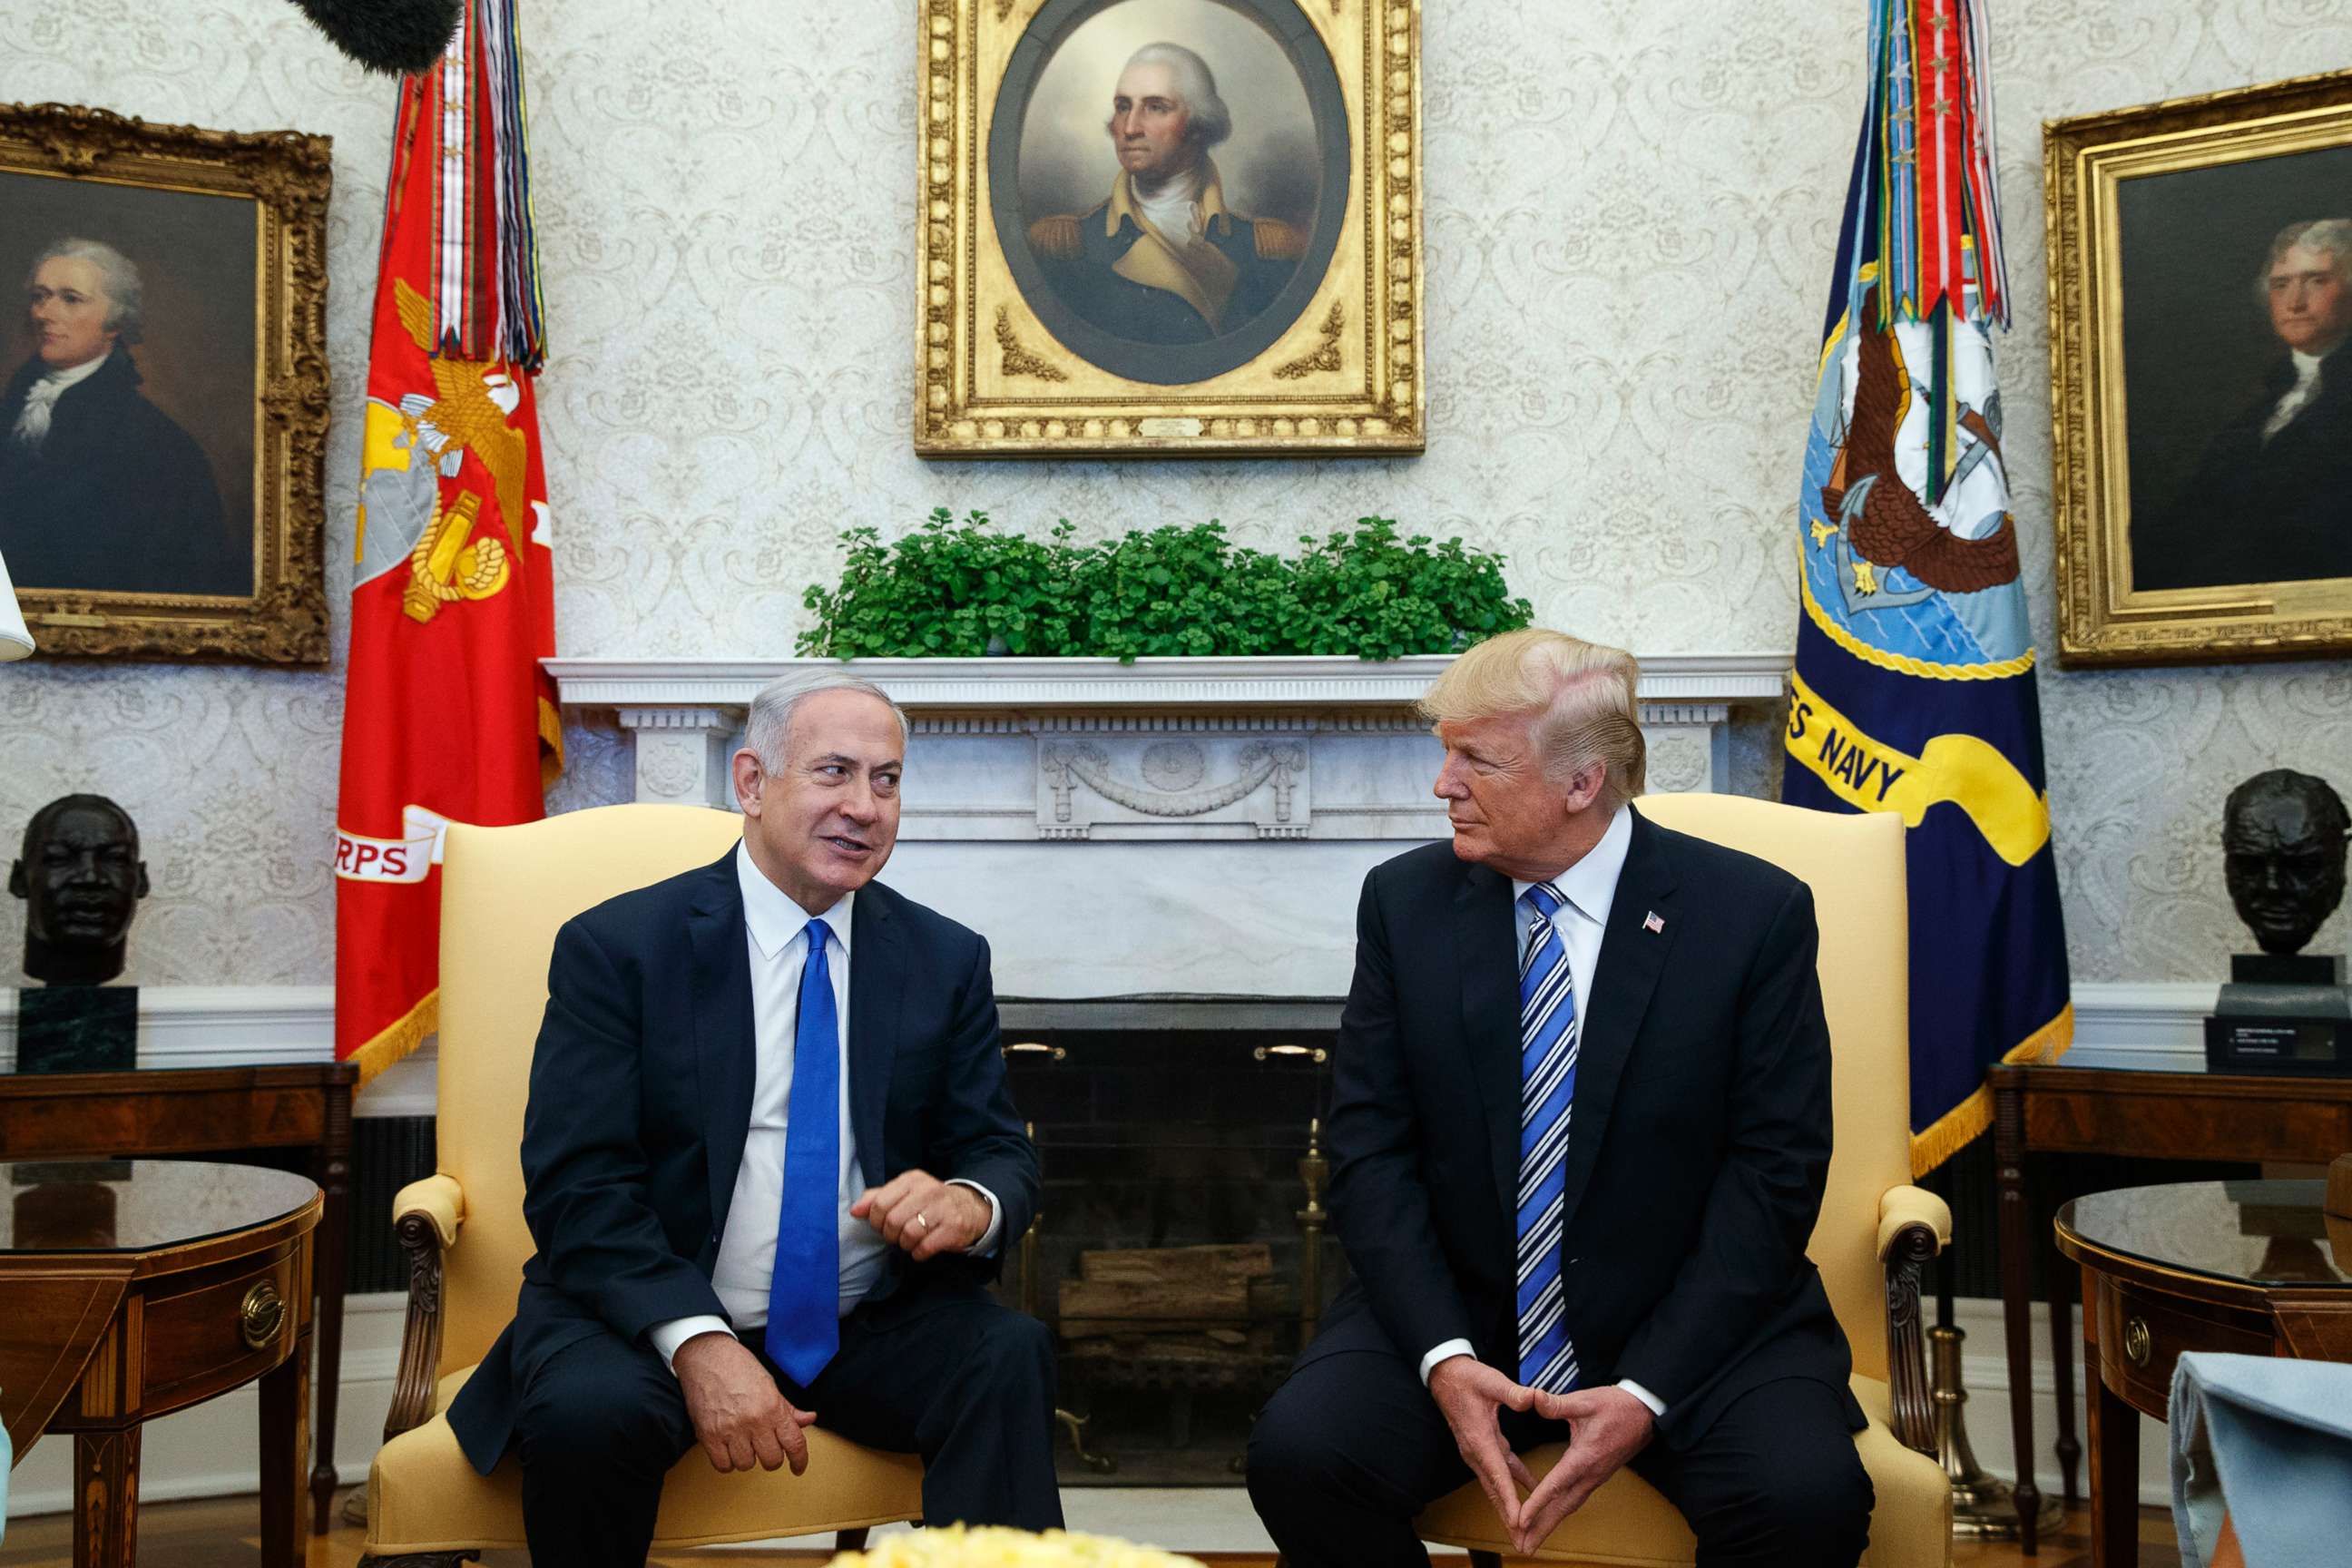 PHOTO: President Donald Trump meets with Israeli Prime Minister Benjamin Netanyahu in the Oval Office of the White House on March 5, 2018, in Washington, D.C.